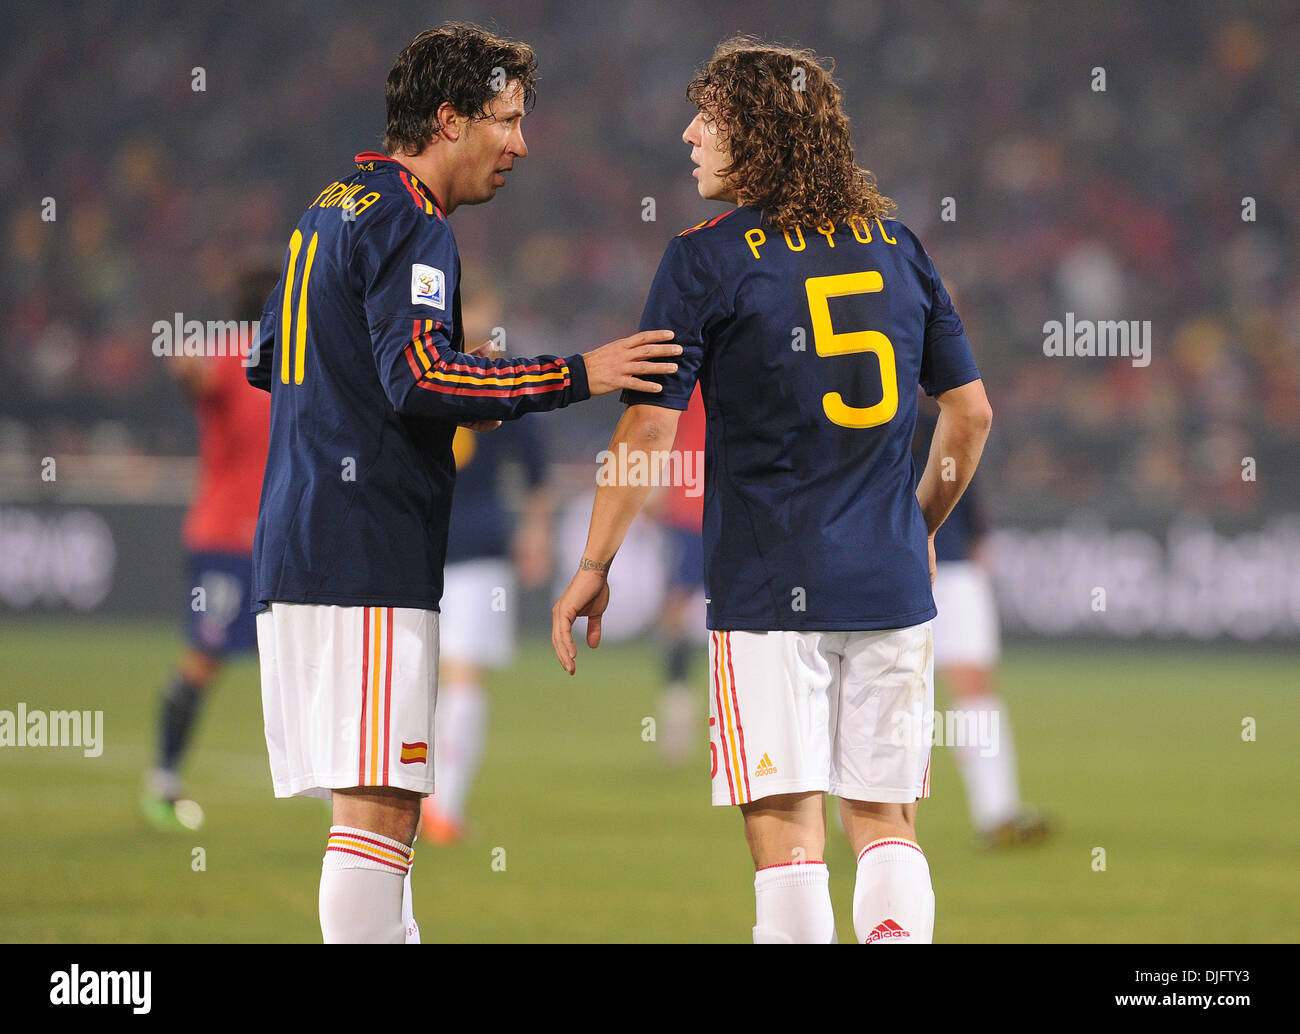 June 25, 2010 - Pretoria, South Africa - Joan Capdevila of Spain speaks with Carles Puyol during the 2010 FIFA World Cup soccer match between Chile and Spain at Loftus Versfeld Stadium on June 25, 2010 in Pretoria, South Africa. (Credit Image: © Luca Ghidoni/ZUMApress.com) Stock Photo